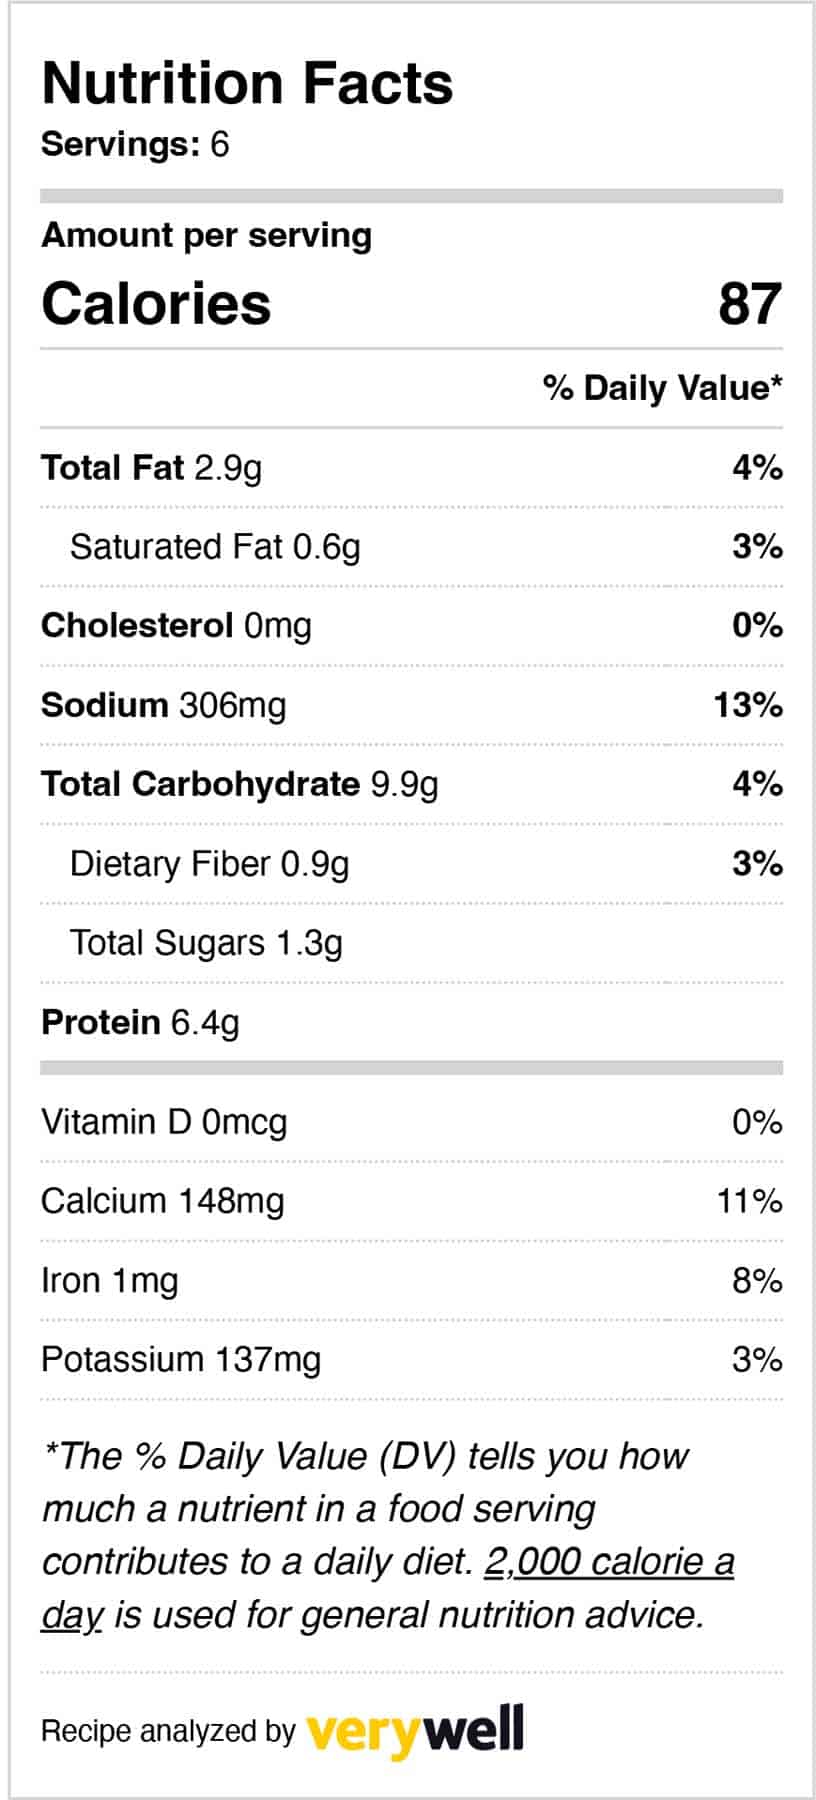 table of nutrition facts